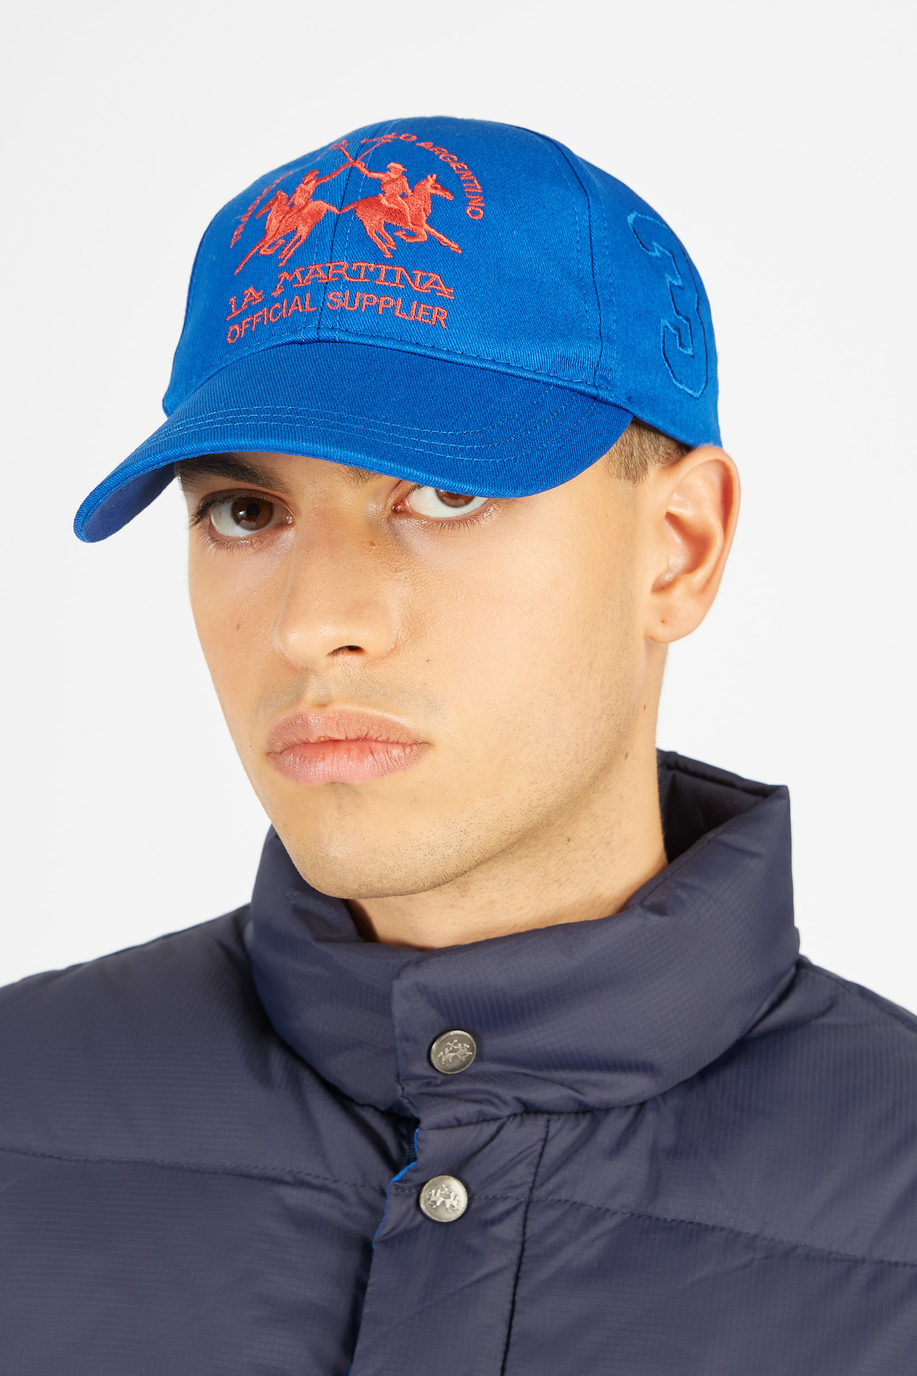 Unisex baseball cap with adjustable regular fit closure - Clubhouse outfits | La Martina - Official Online Shop